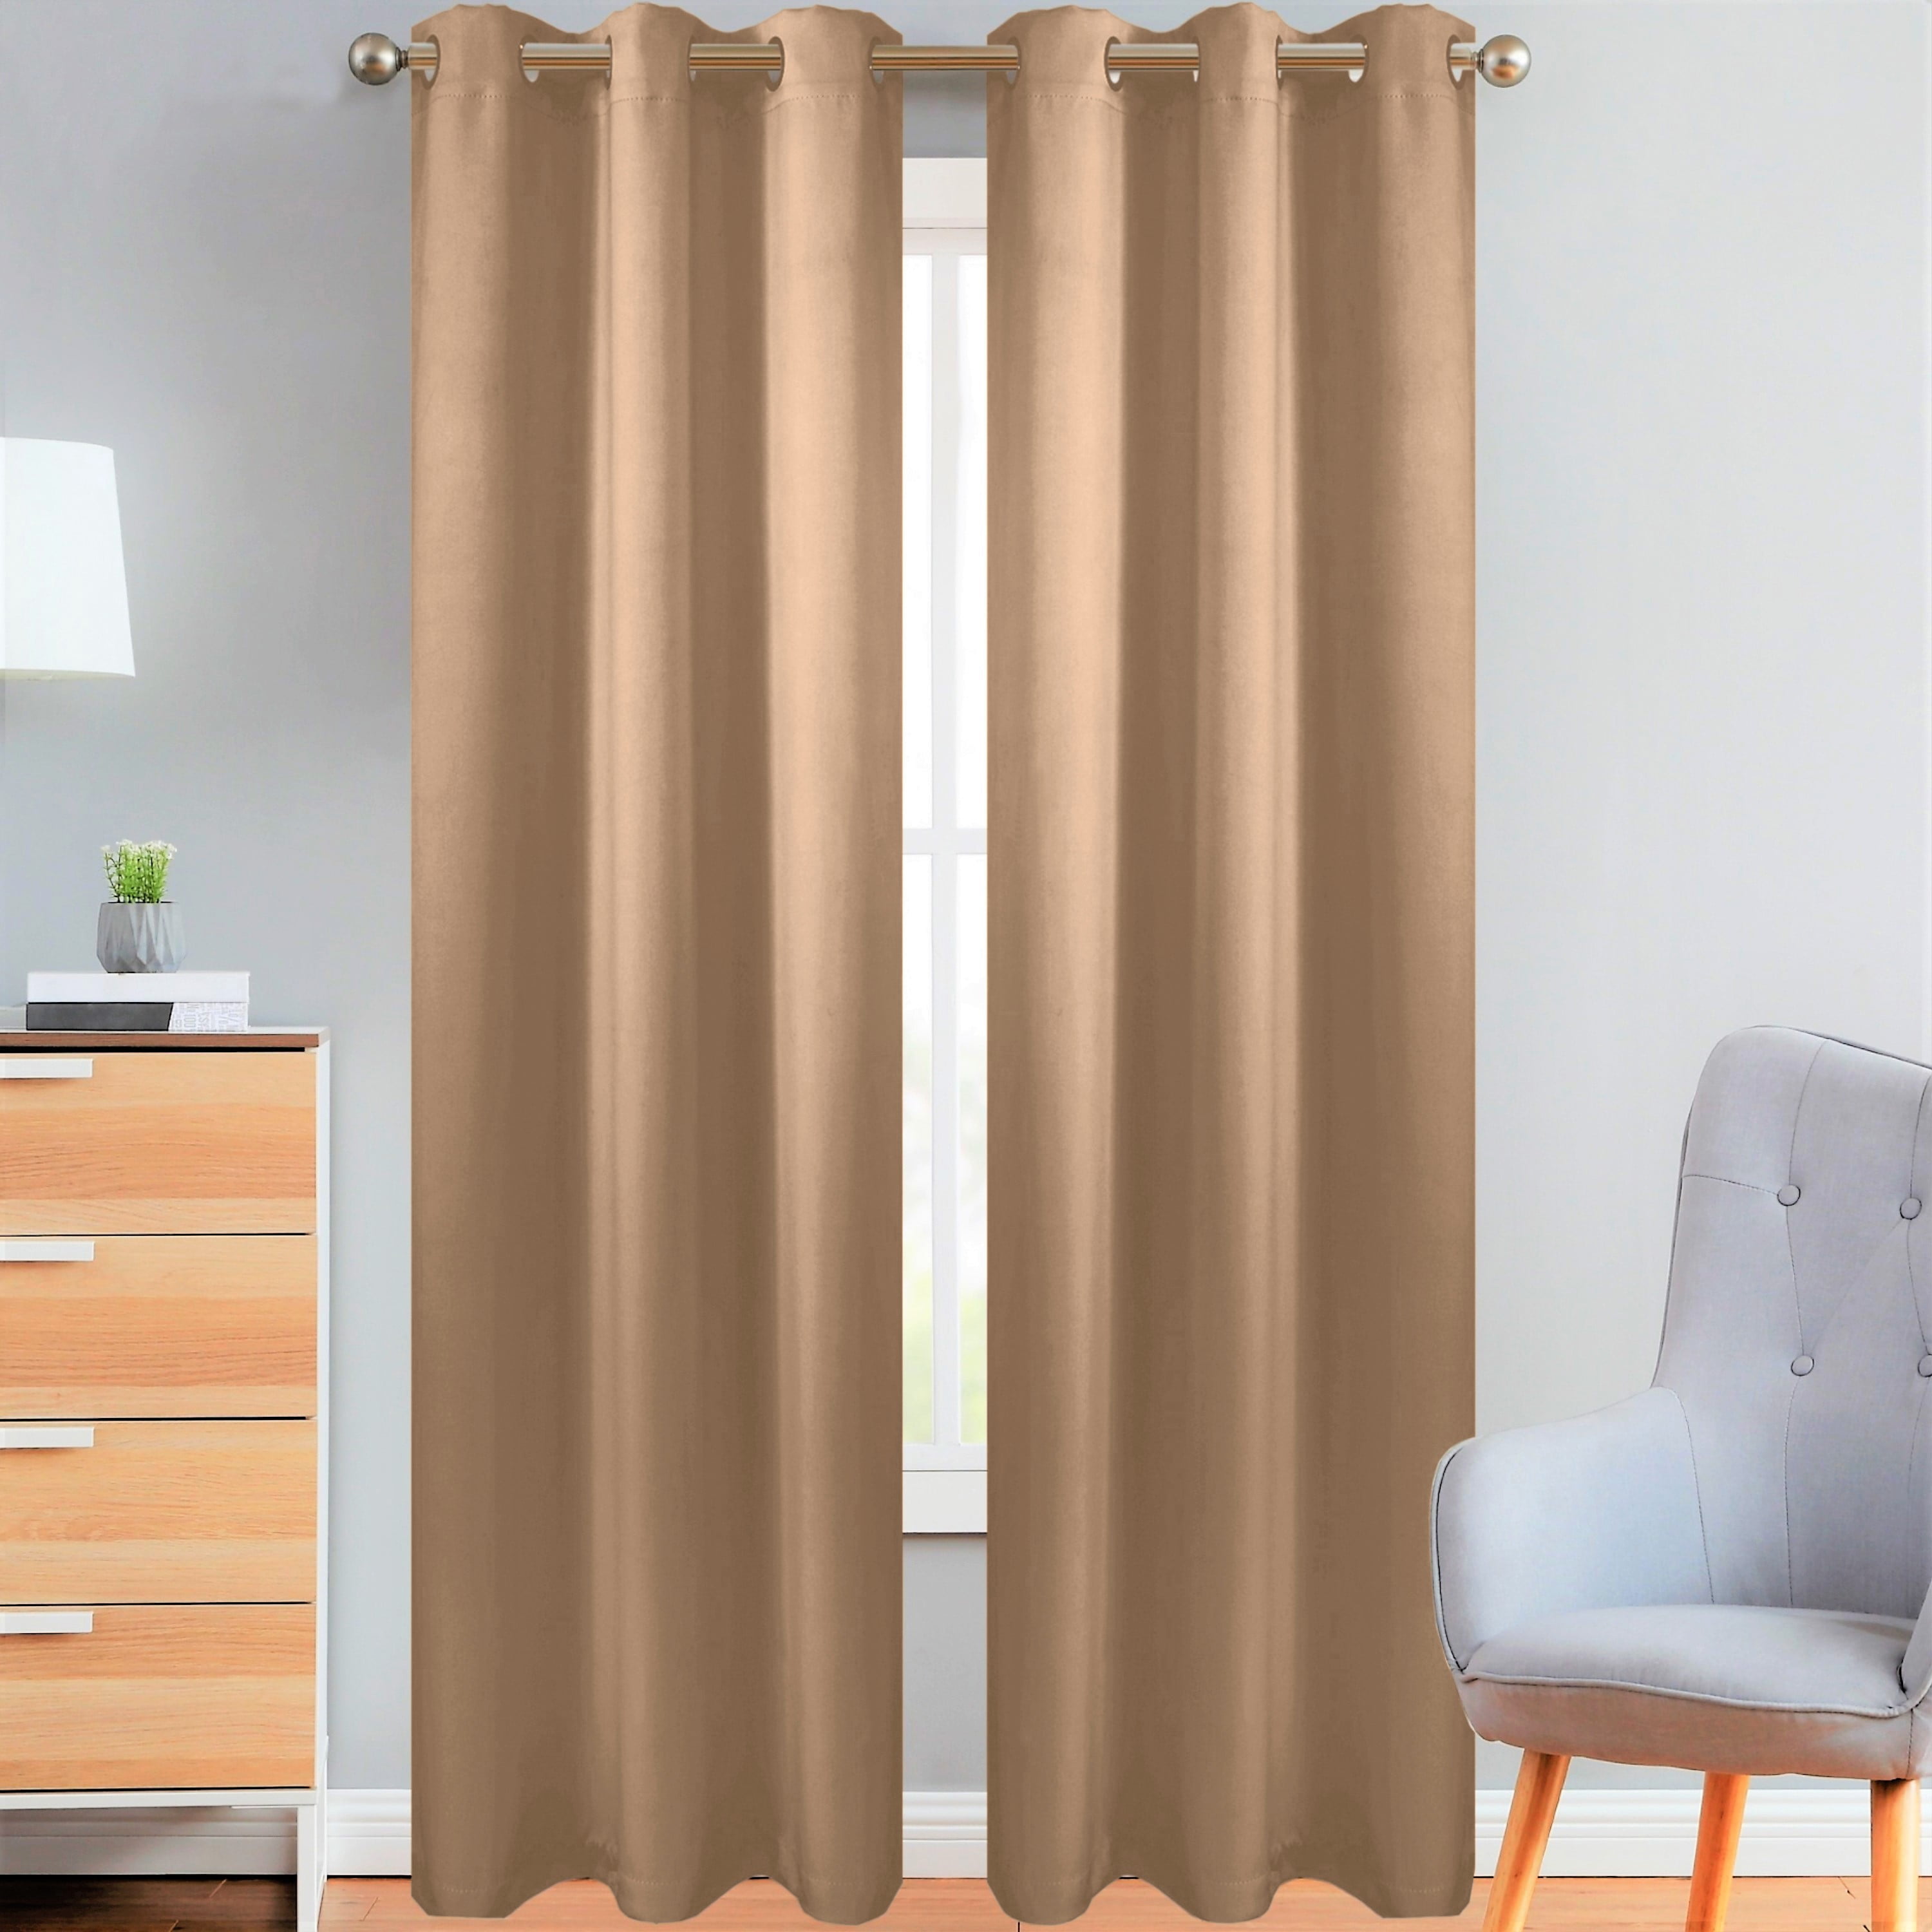 Style Basics 84 Inch Long Blackout Curtains For Bedroom 100% Total